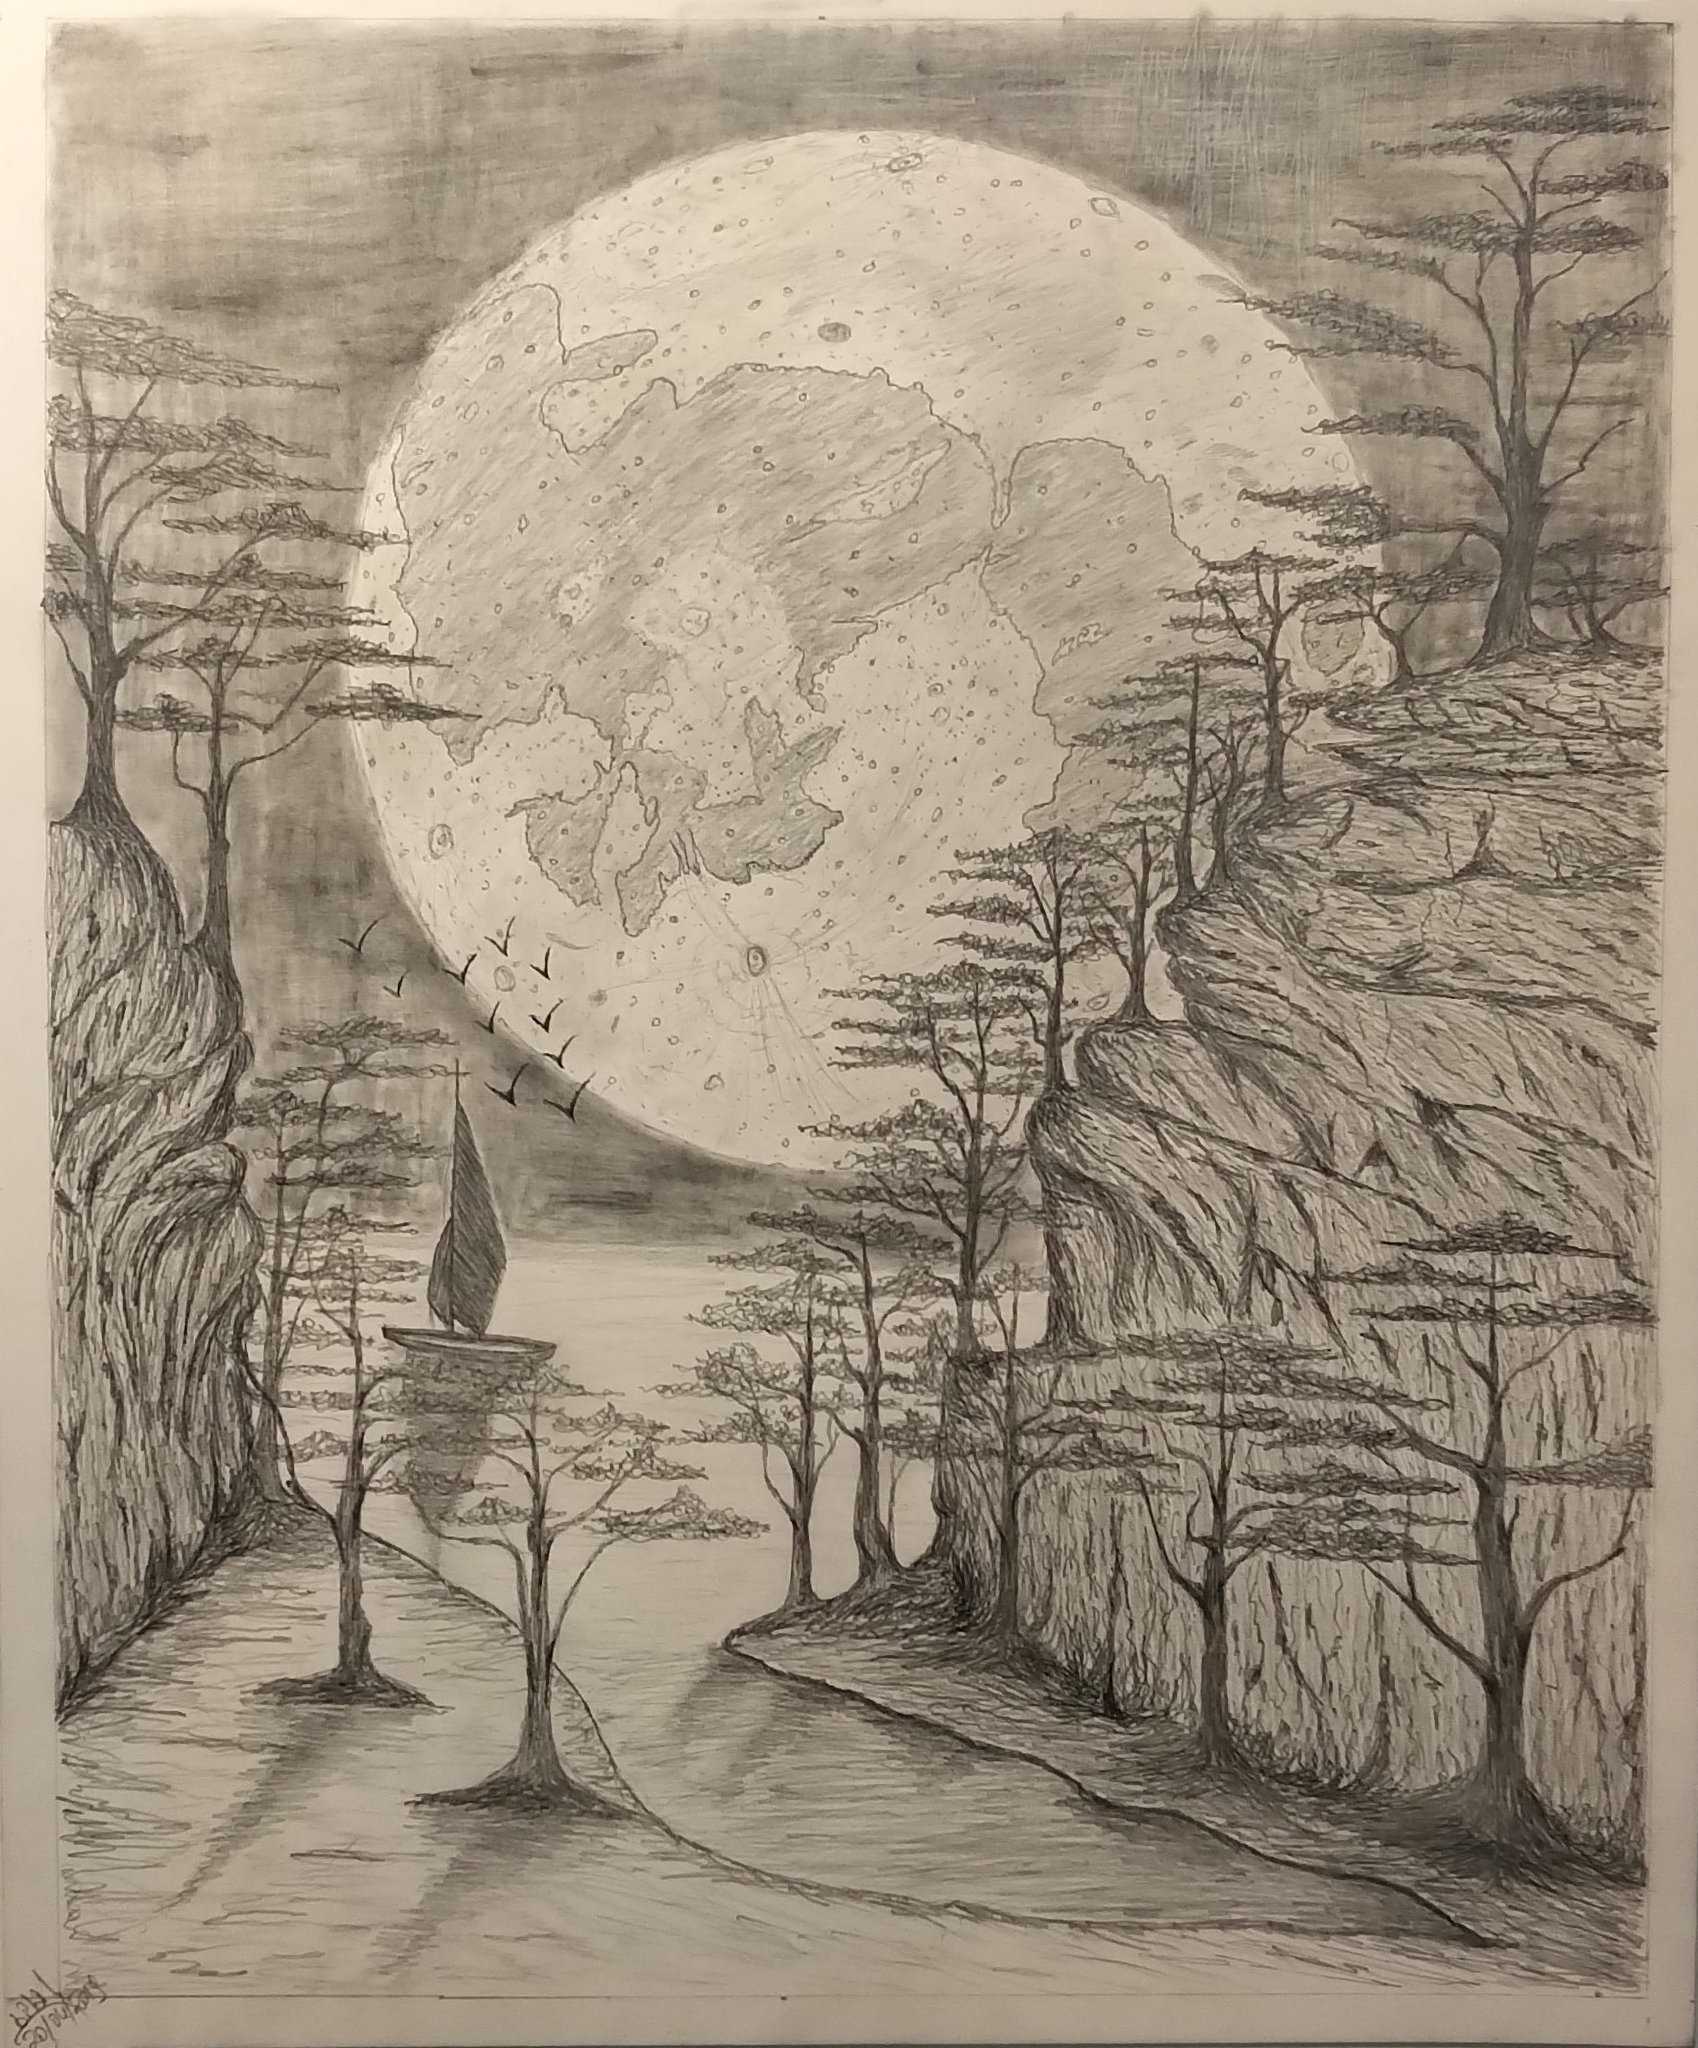 Dreaming on the Moon Pencil Sketch by PencilBeatsPaper on DeviantArt